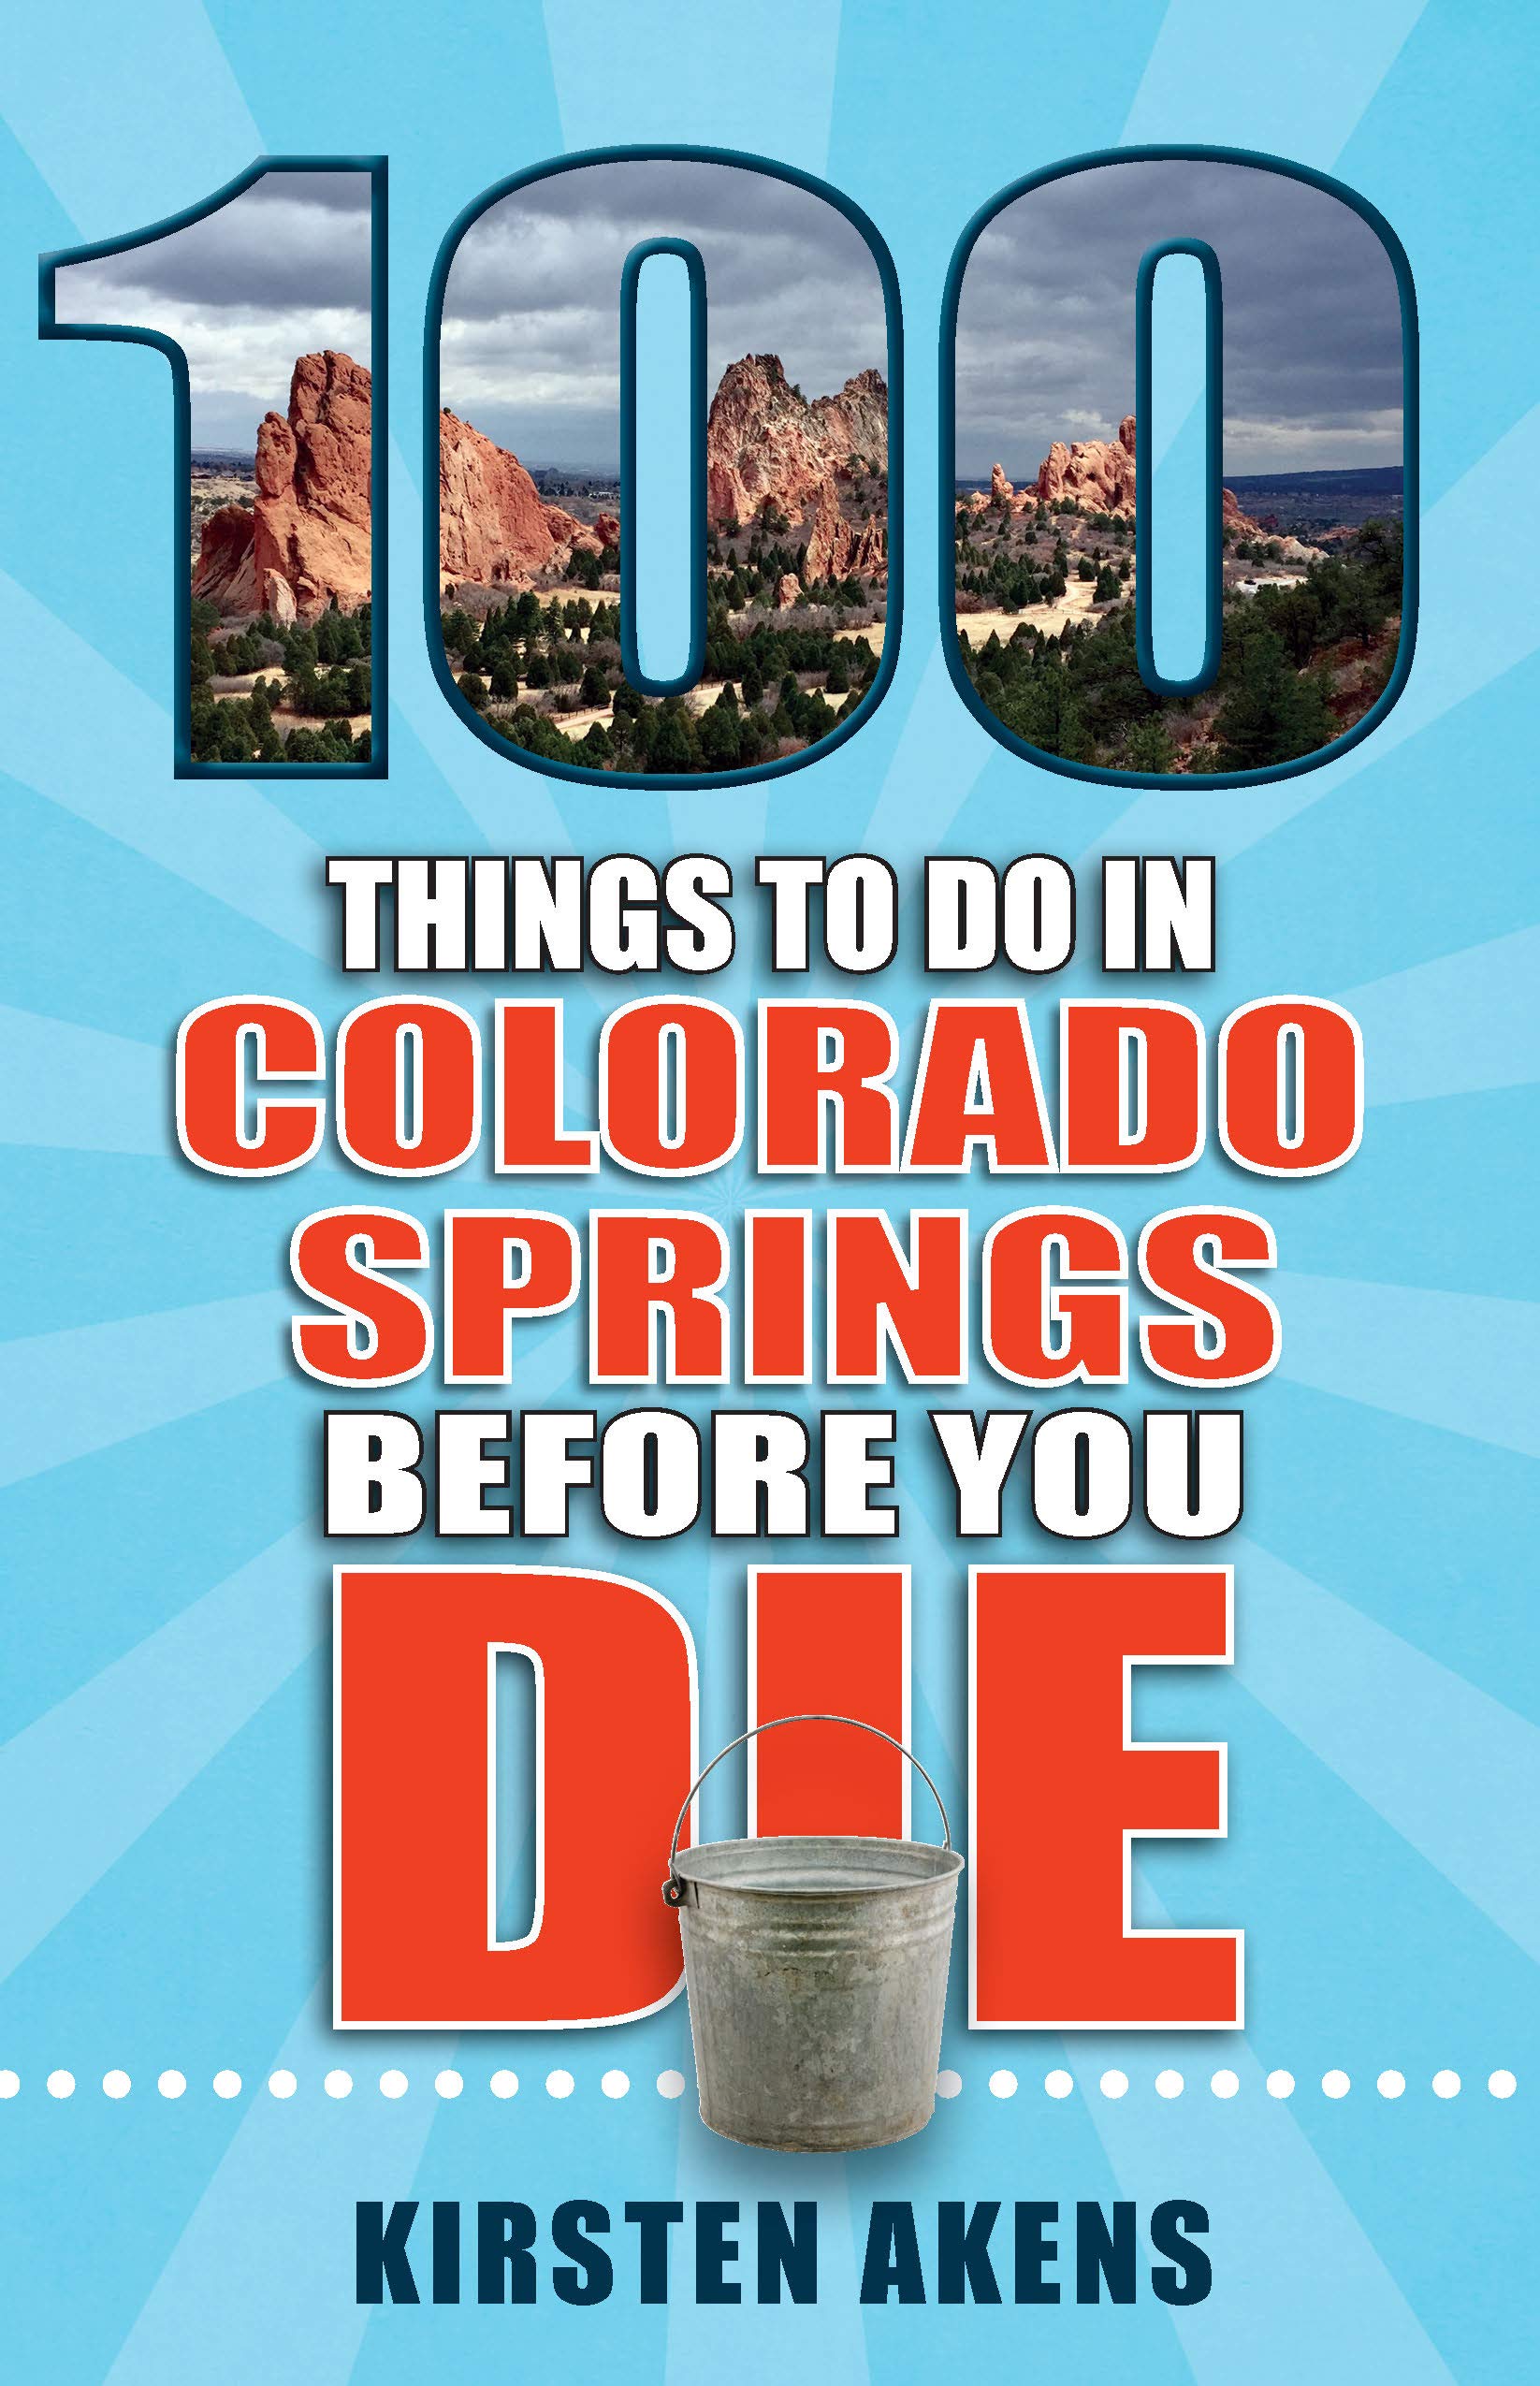 100 Things to Do in Colorado Springs Before You Die (100 Things to Do Before You Die)